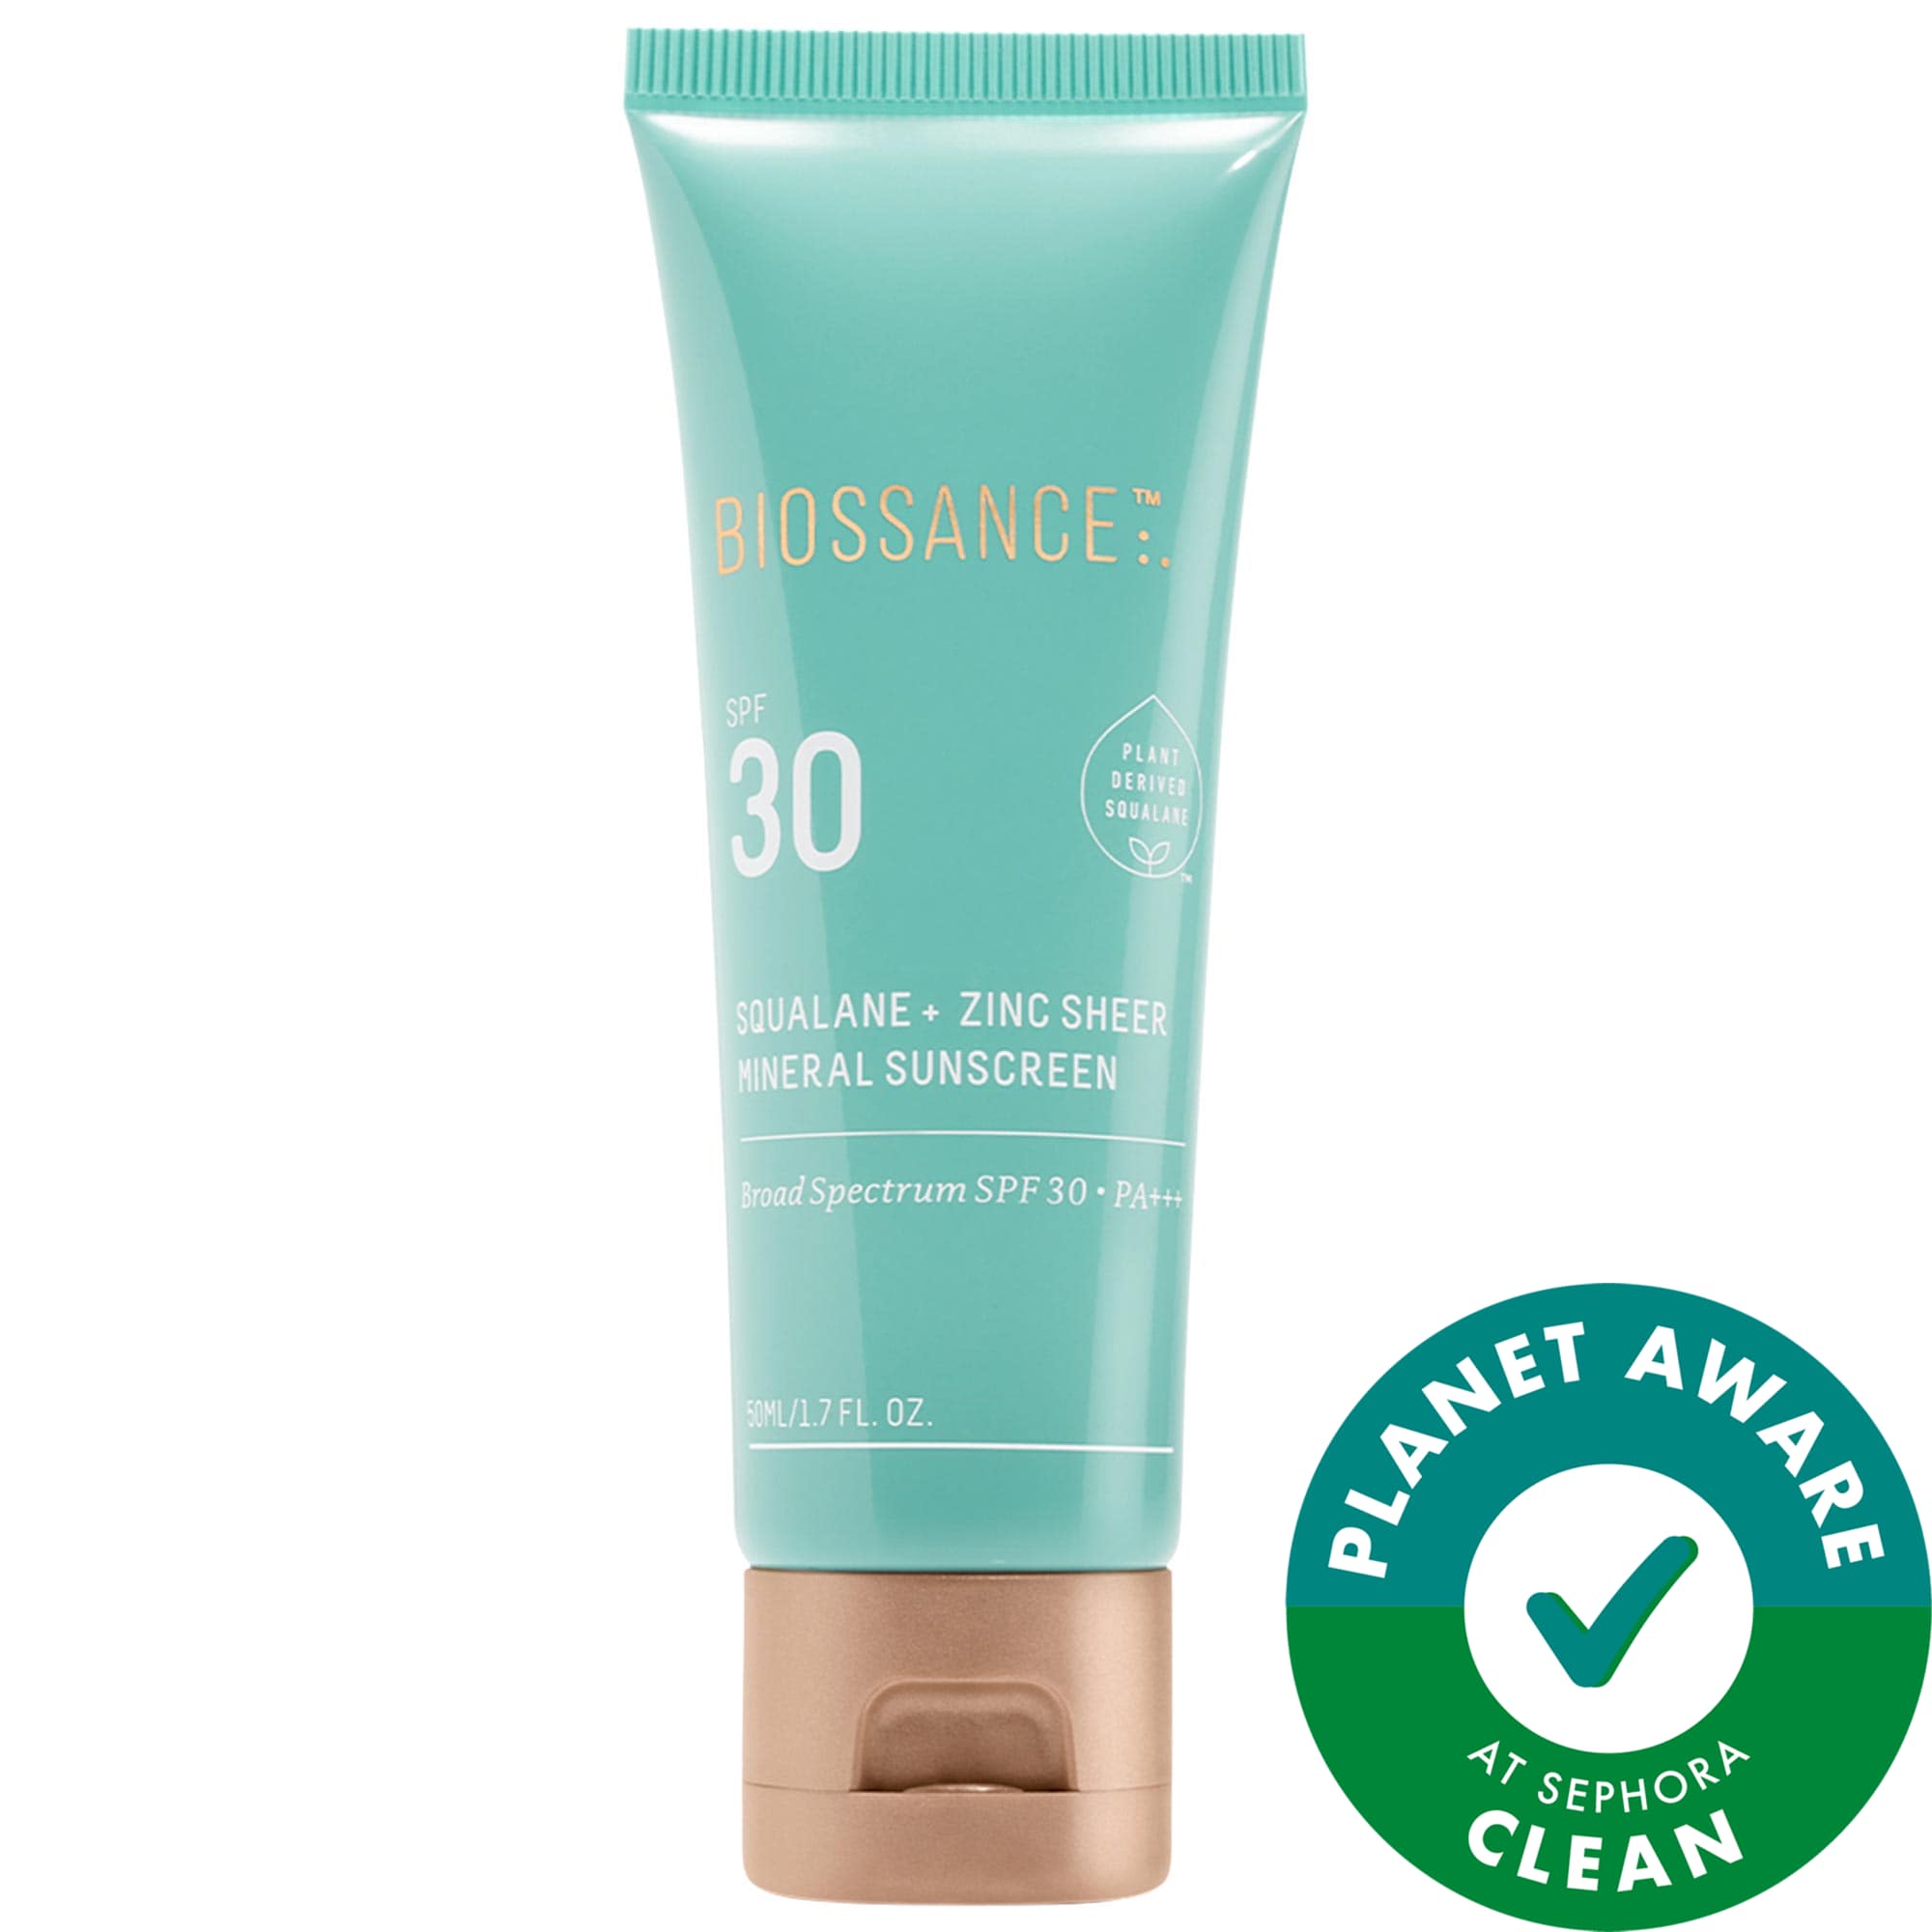 Squalane + Zinc Sheer Hydrating Mineral Face Sunscreen SPF 30 with Ectoin Biossance